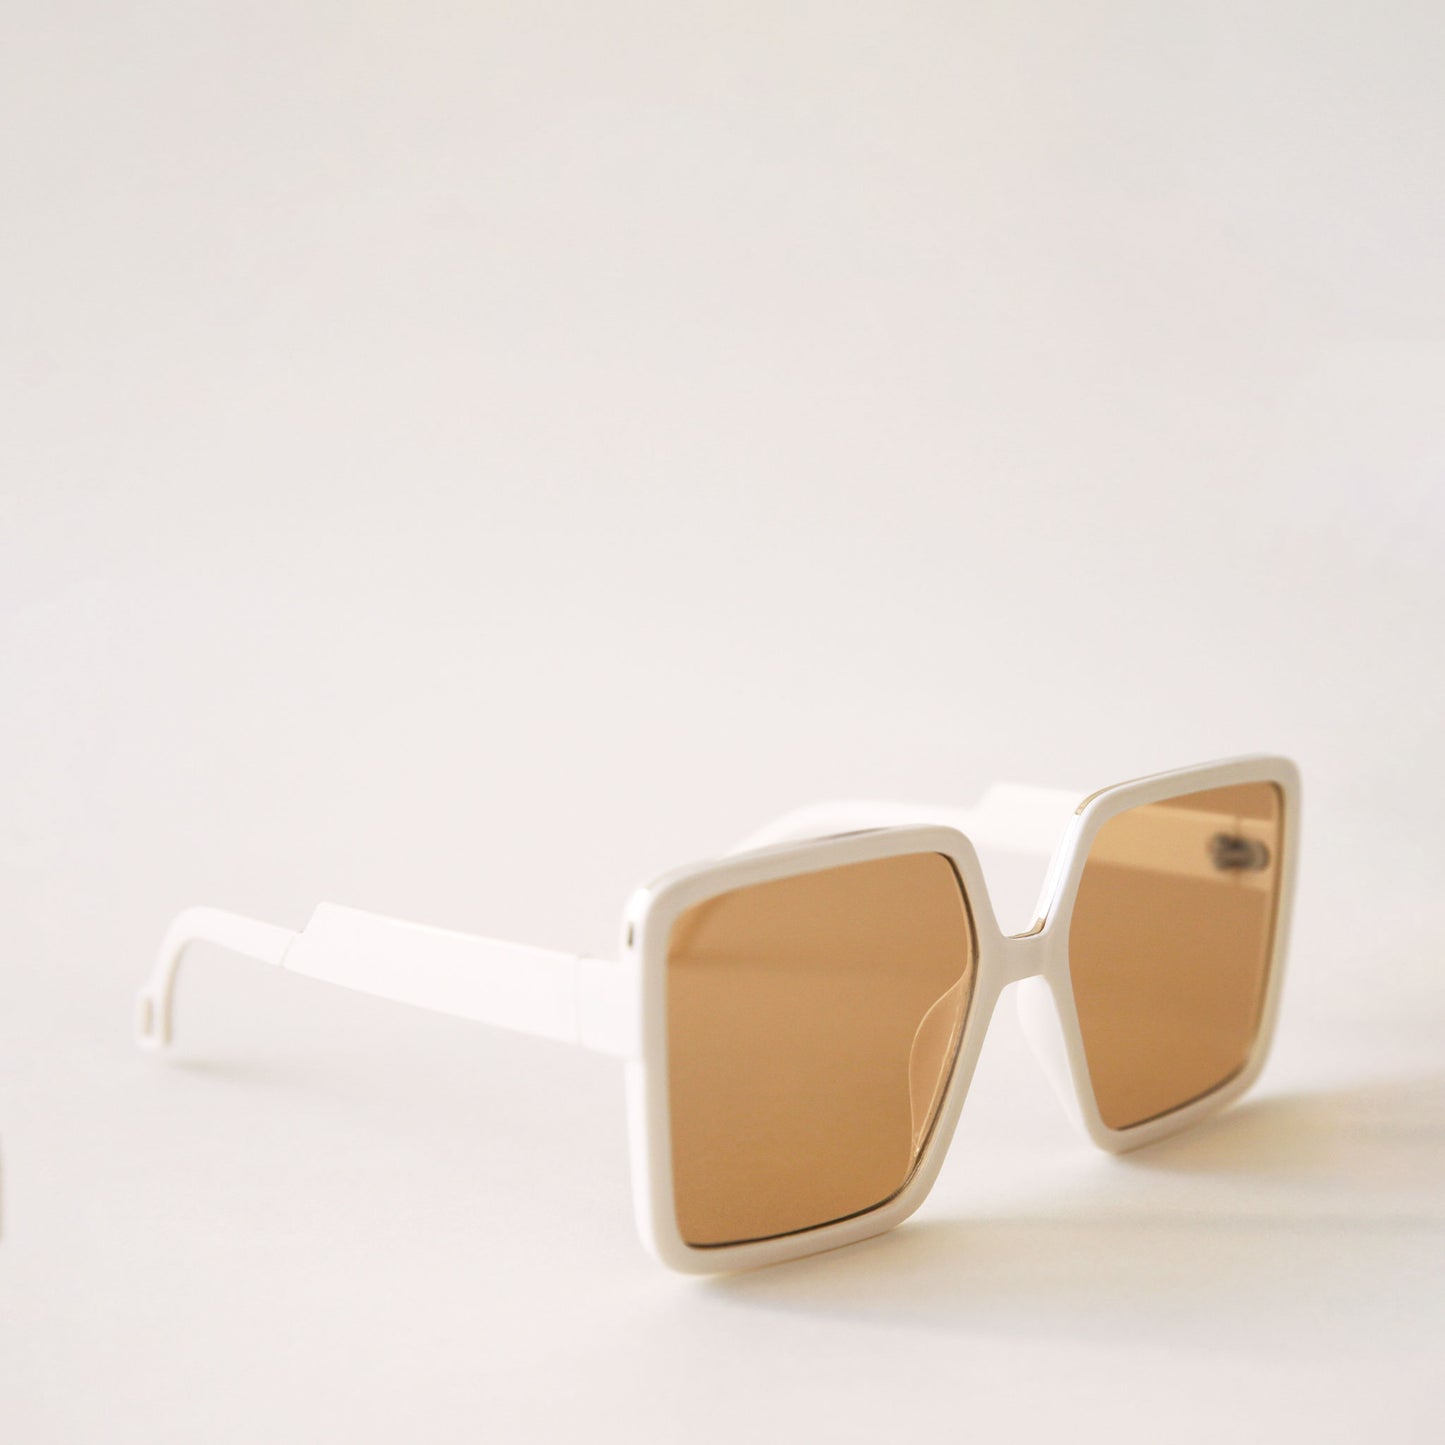 70's inspired square sunglasses with an oversized white frame and amber colored lenses.